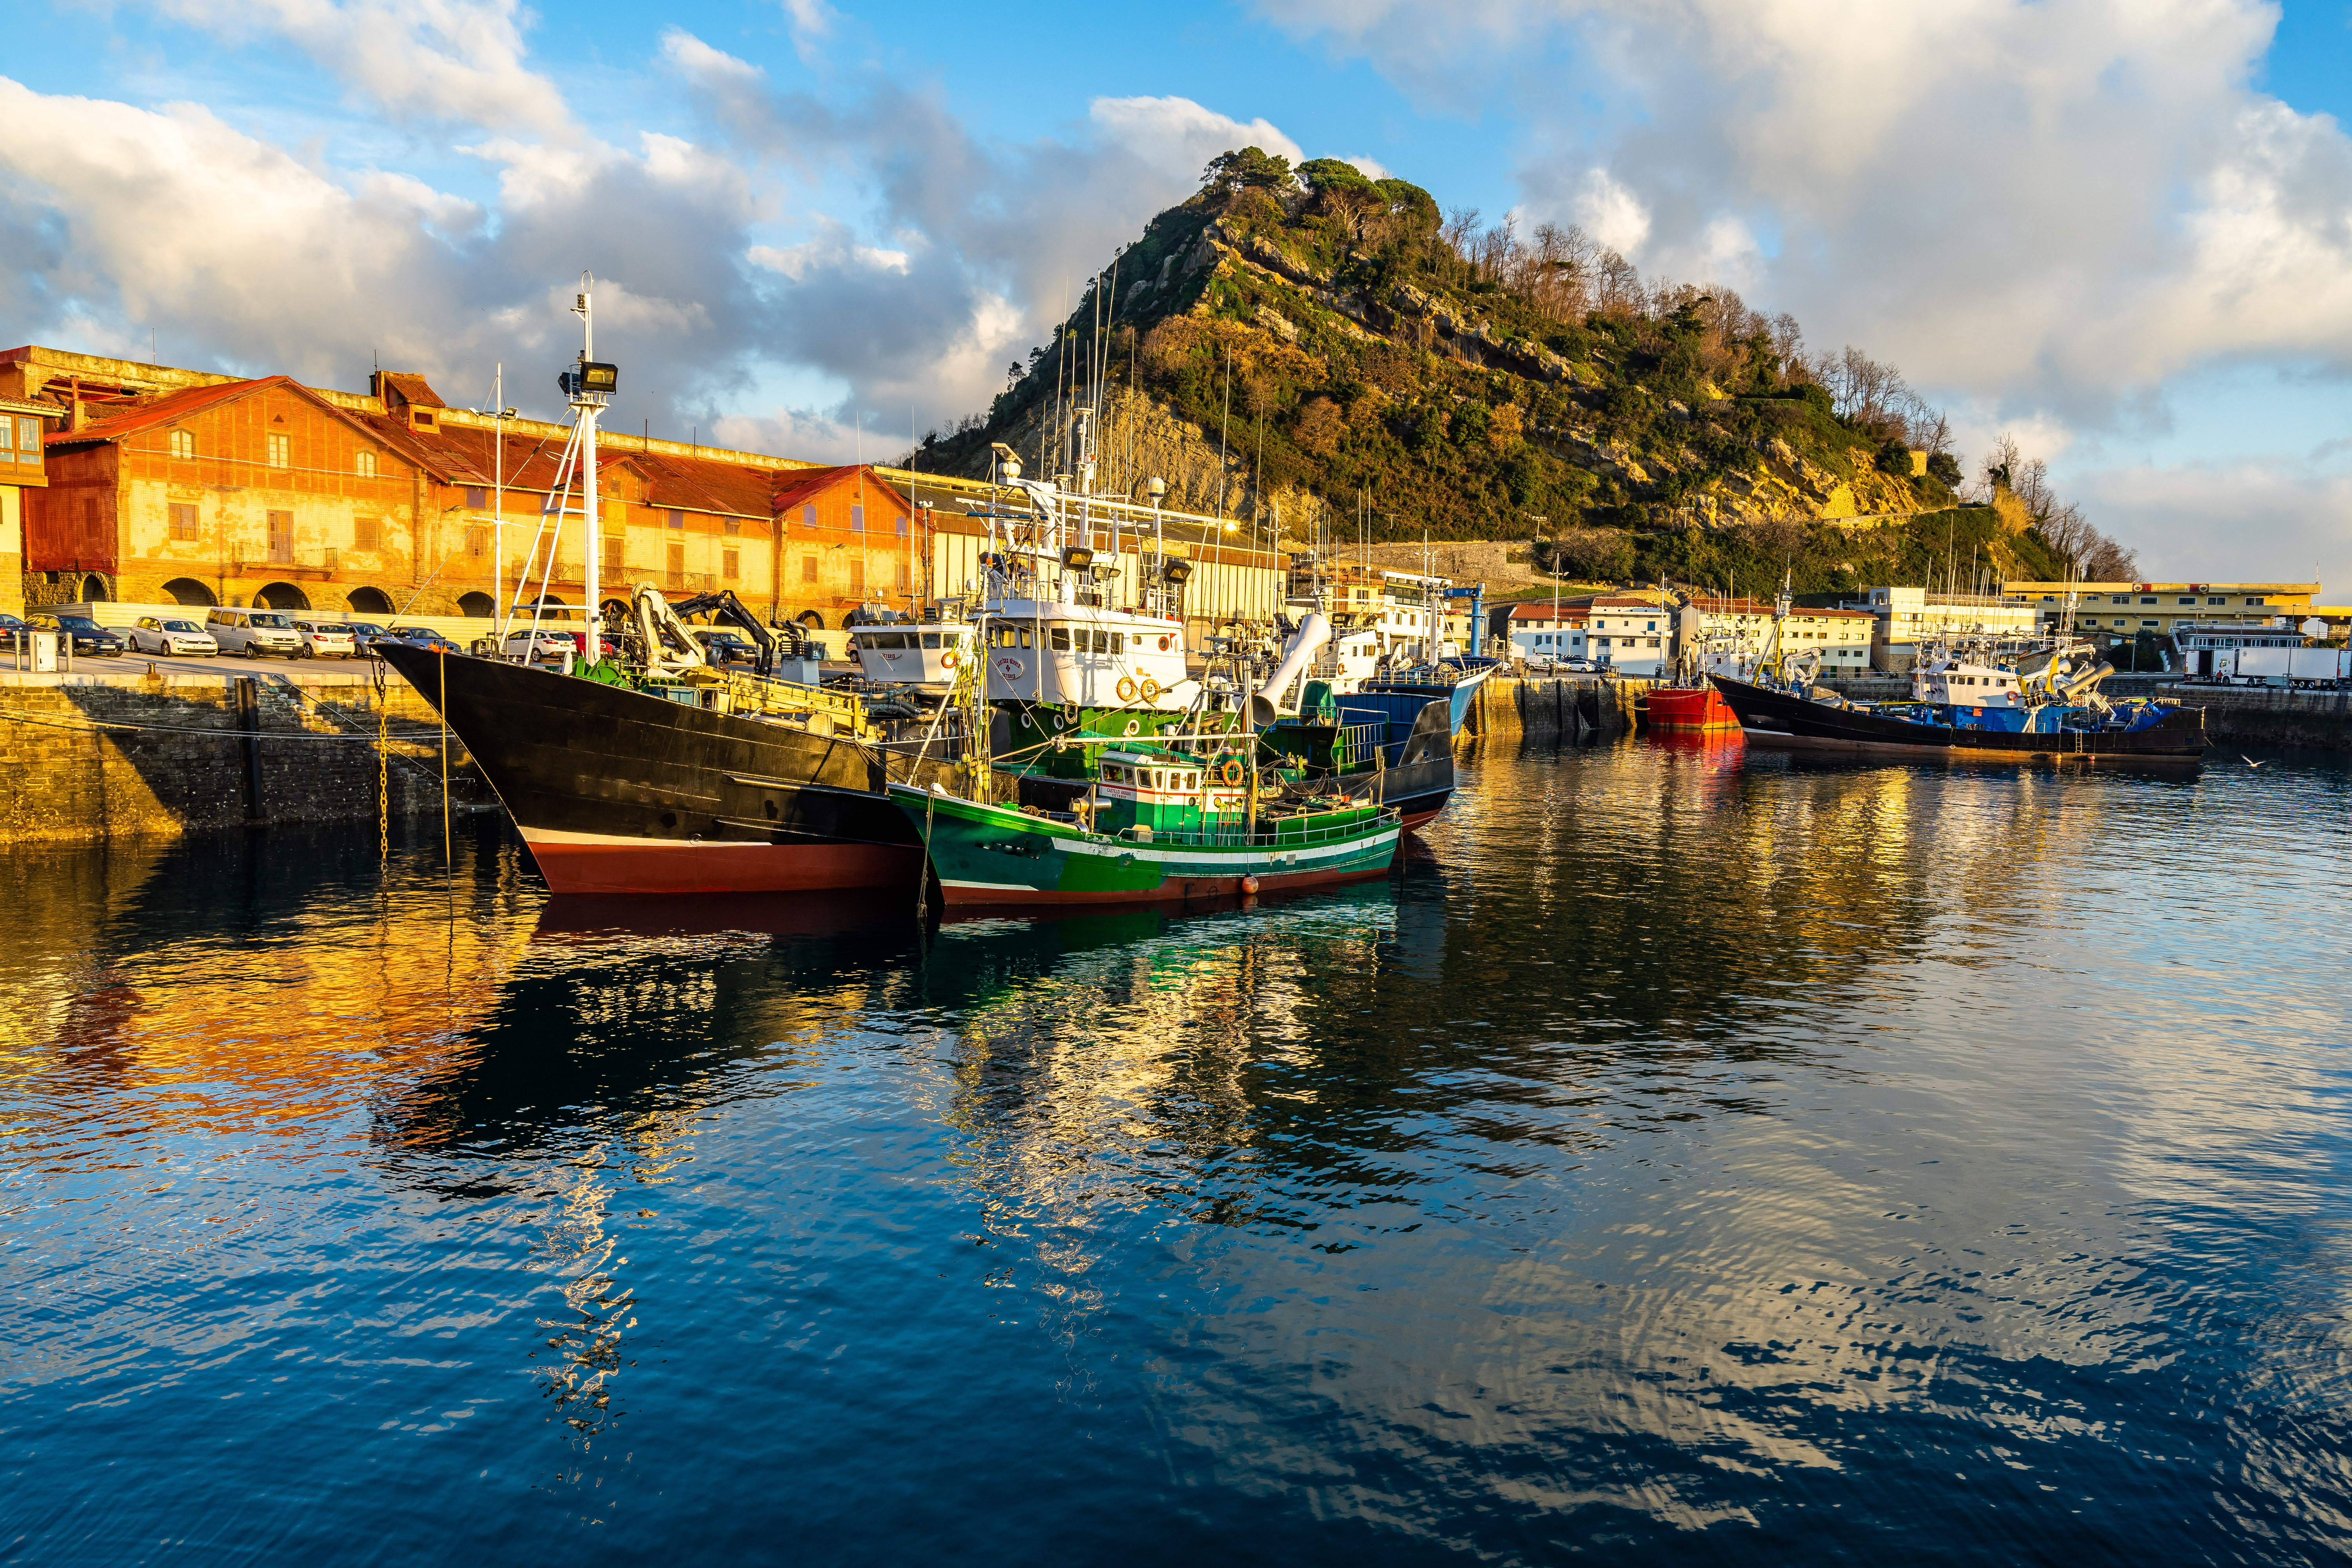 Boats moored in a harbor, with sunset-lit buildings and a large mountain in the background